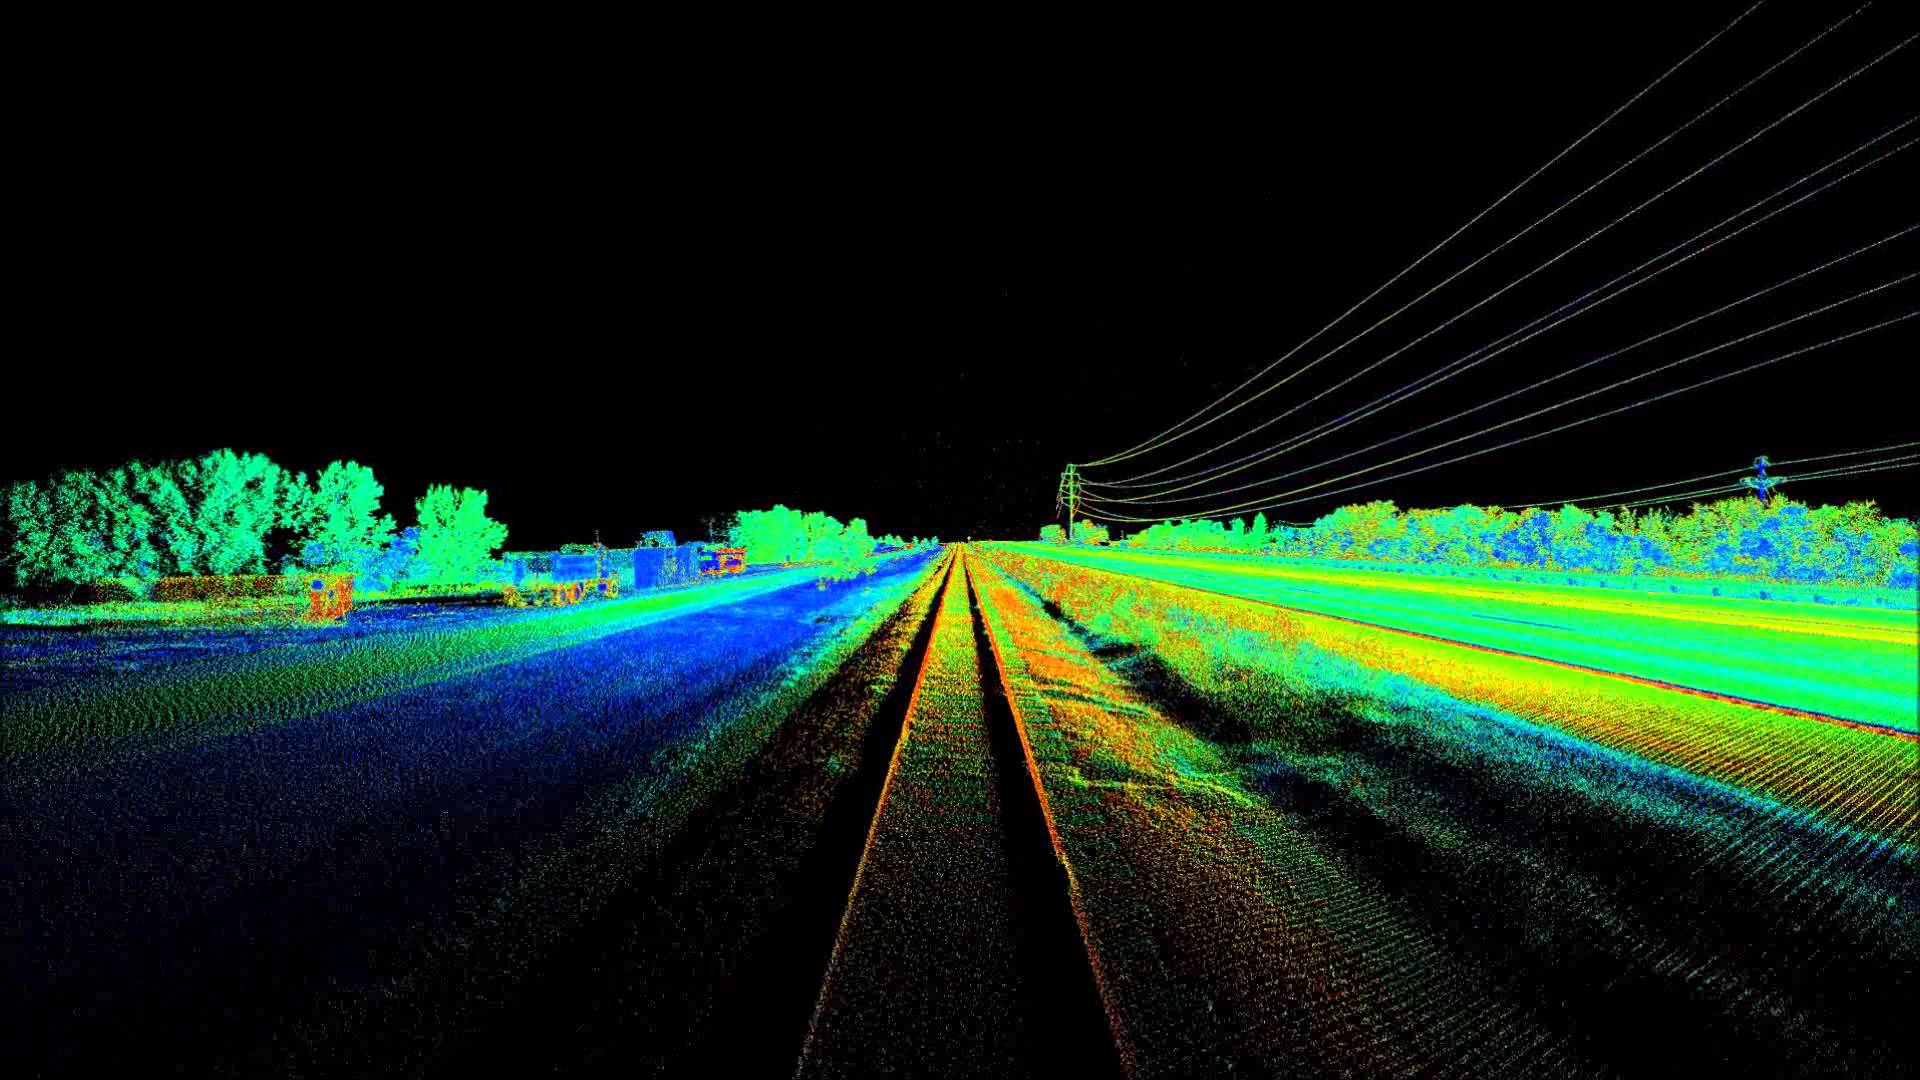 Railway & Transportation-GPS Location such as lampposts, traffic signals, traffic signs, billboards etc. are derived using high density mobile LiDAR data.